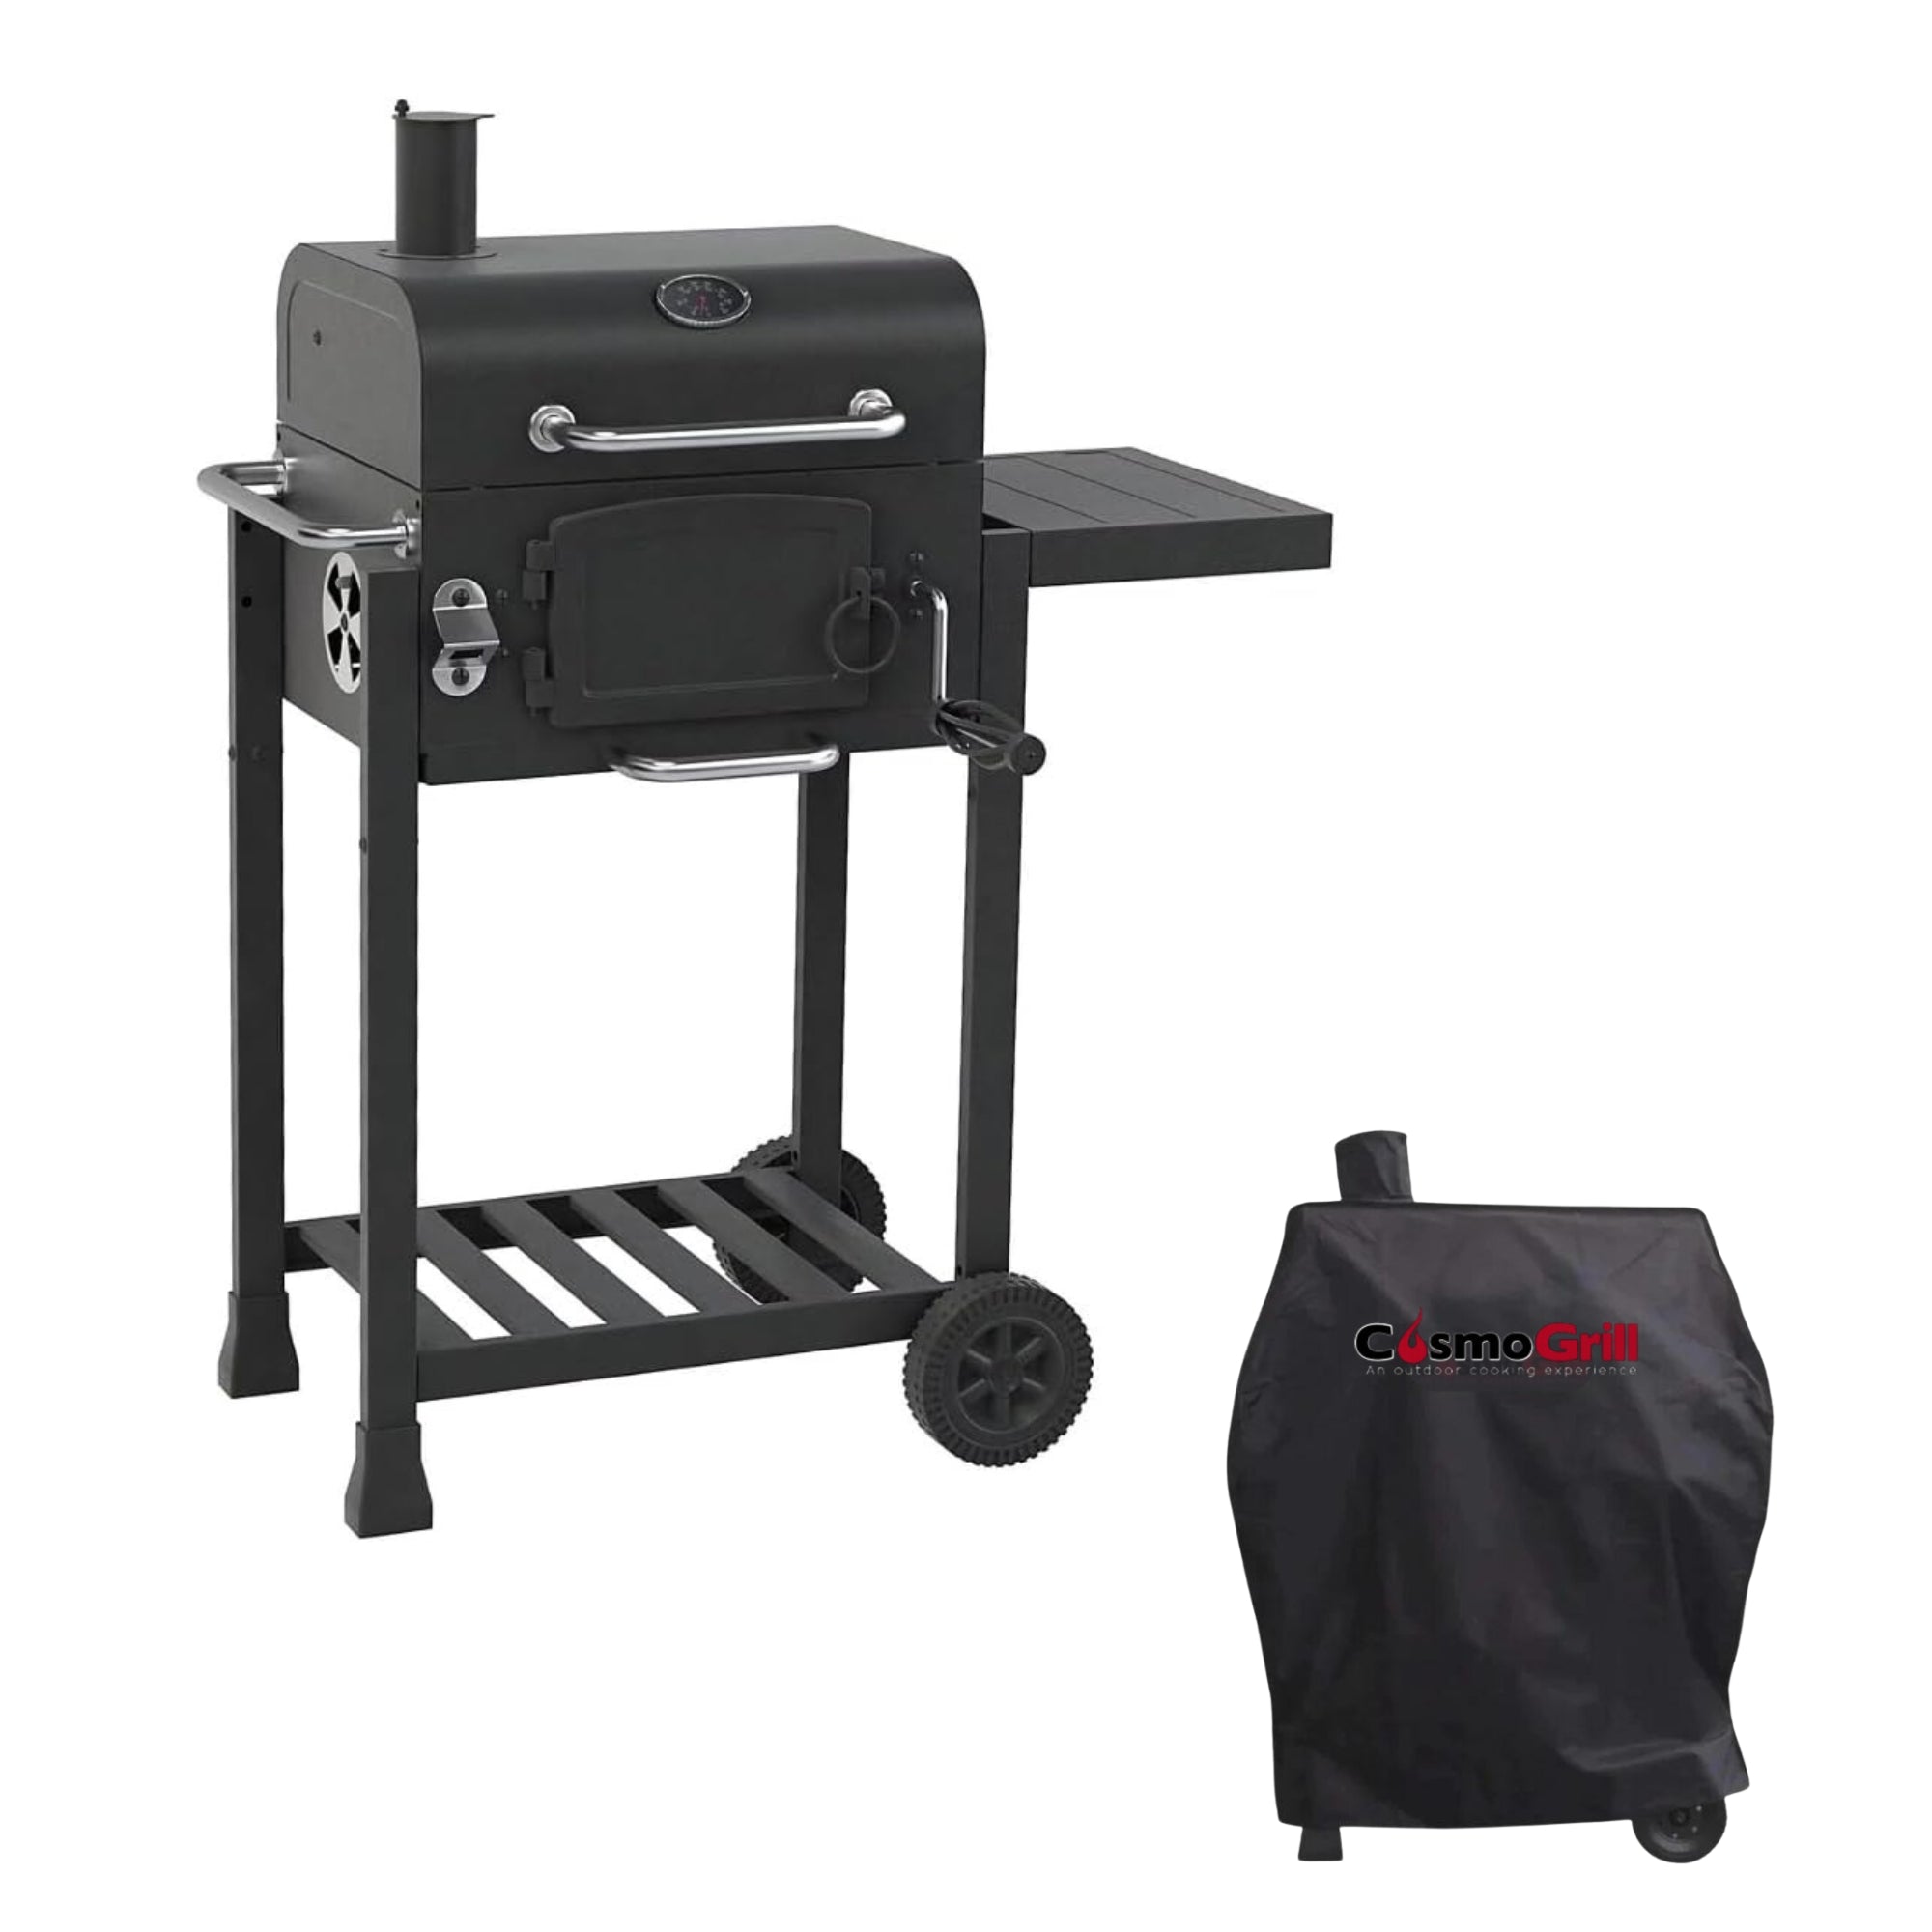 Jr. Smoker Charcoal Barbecue + Cover